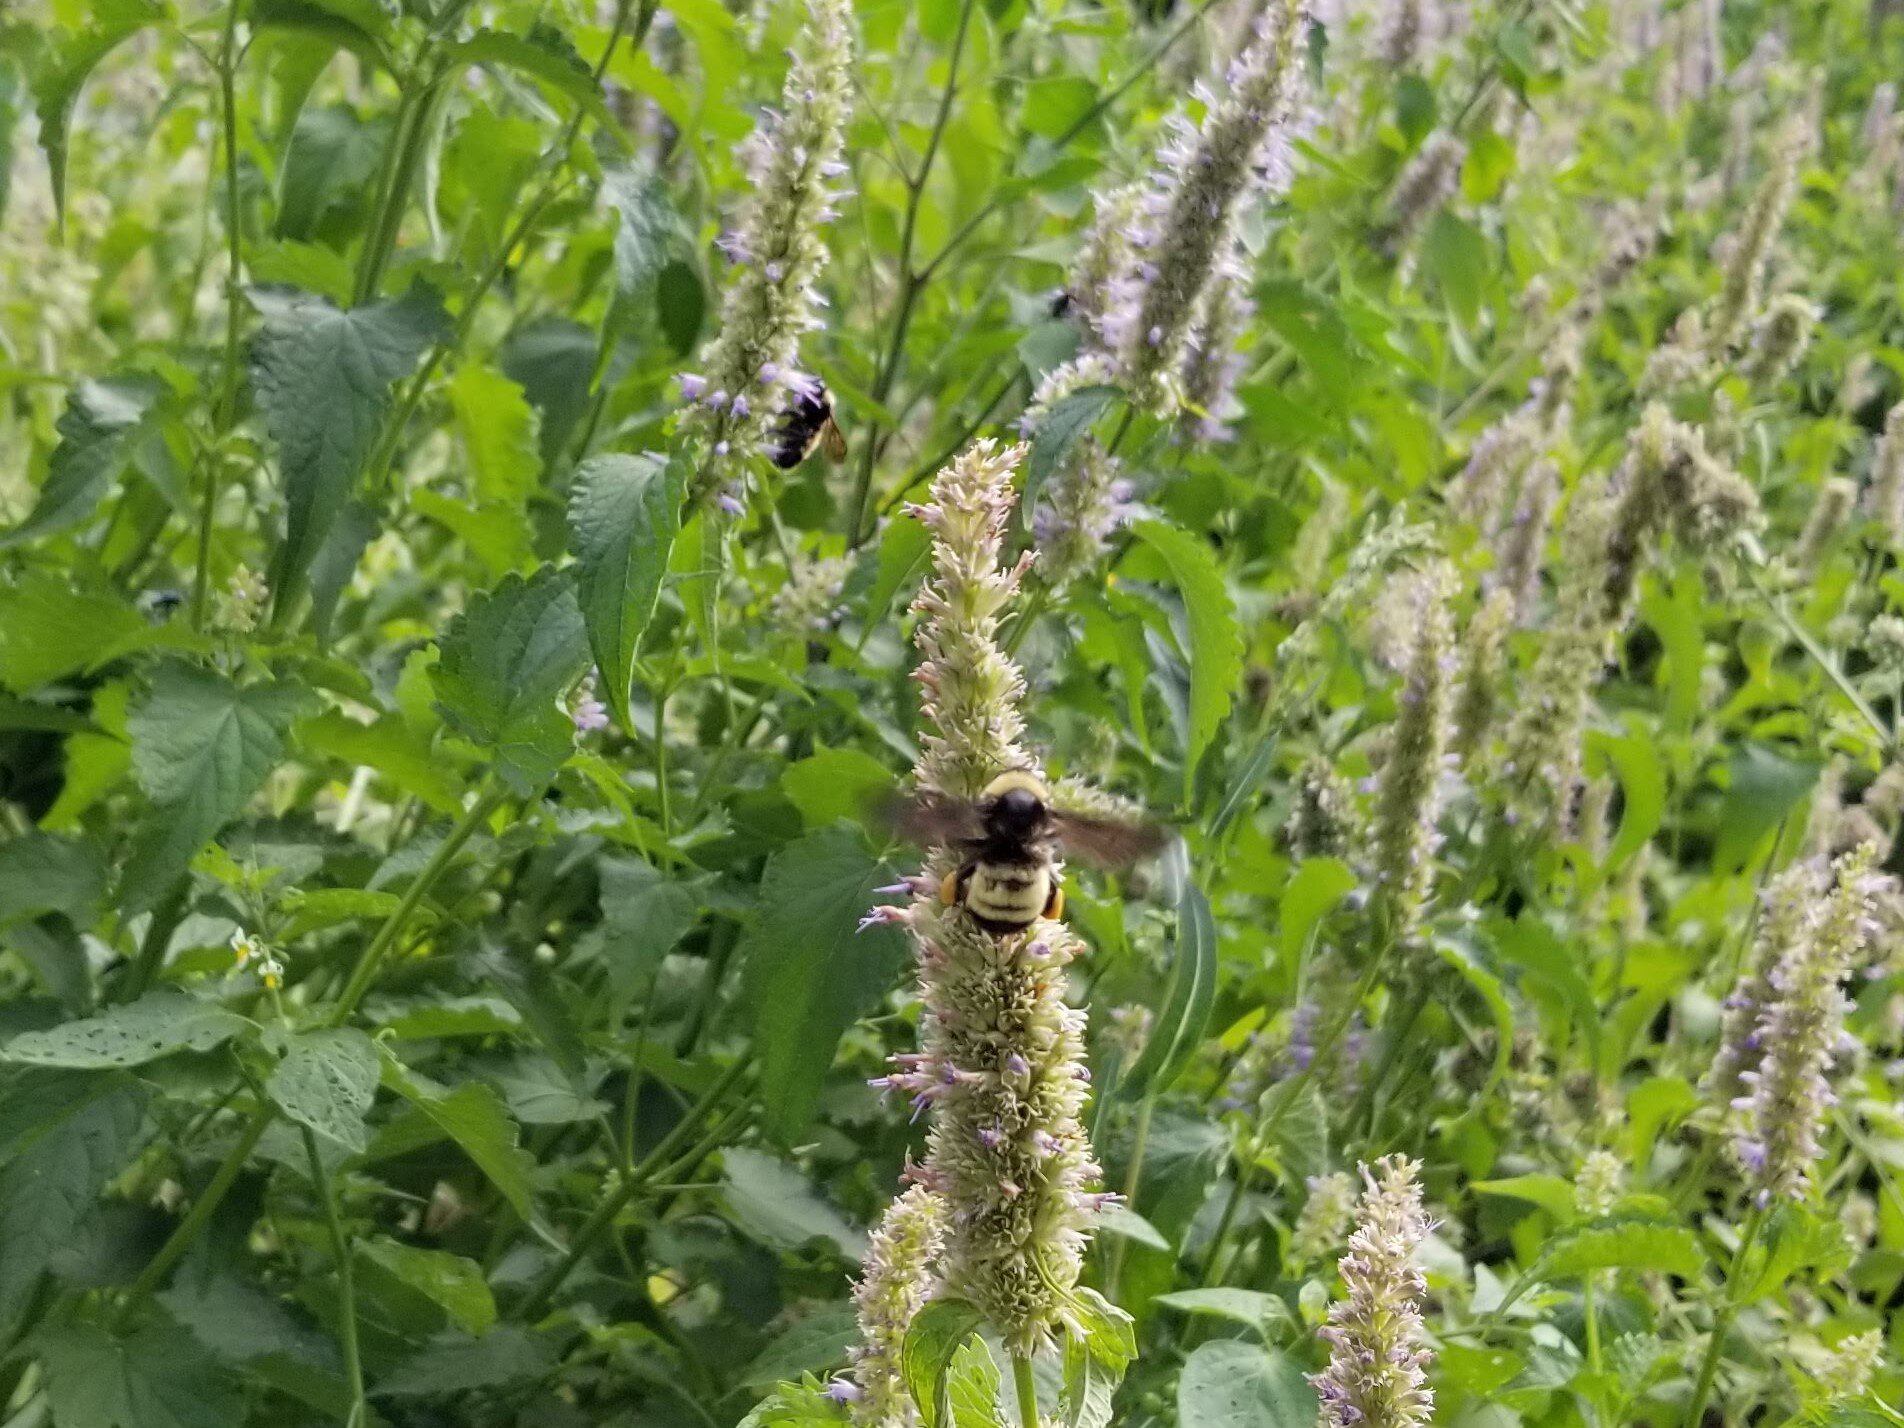 08.14.20 Bees love anise hyssop